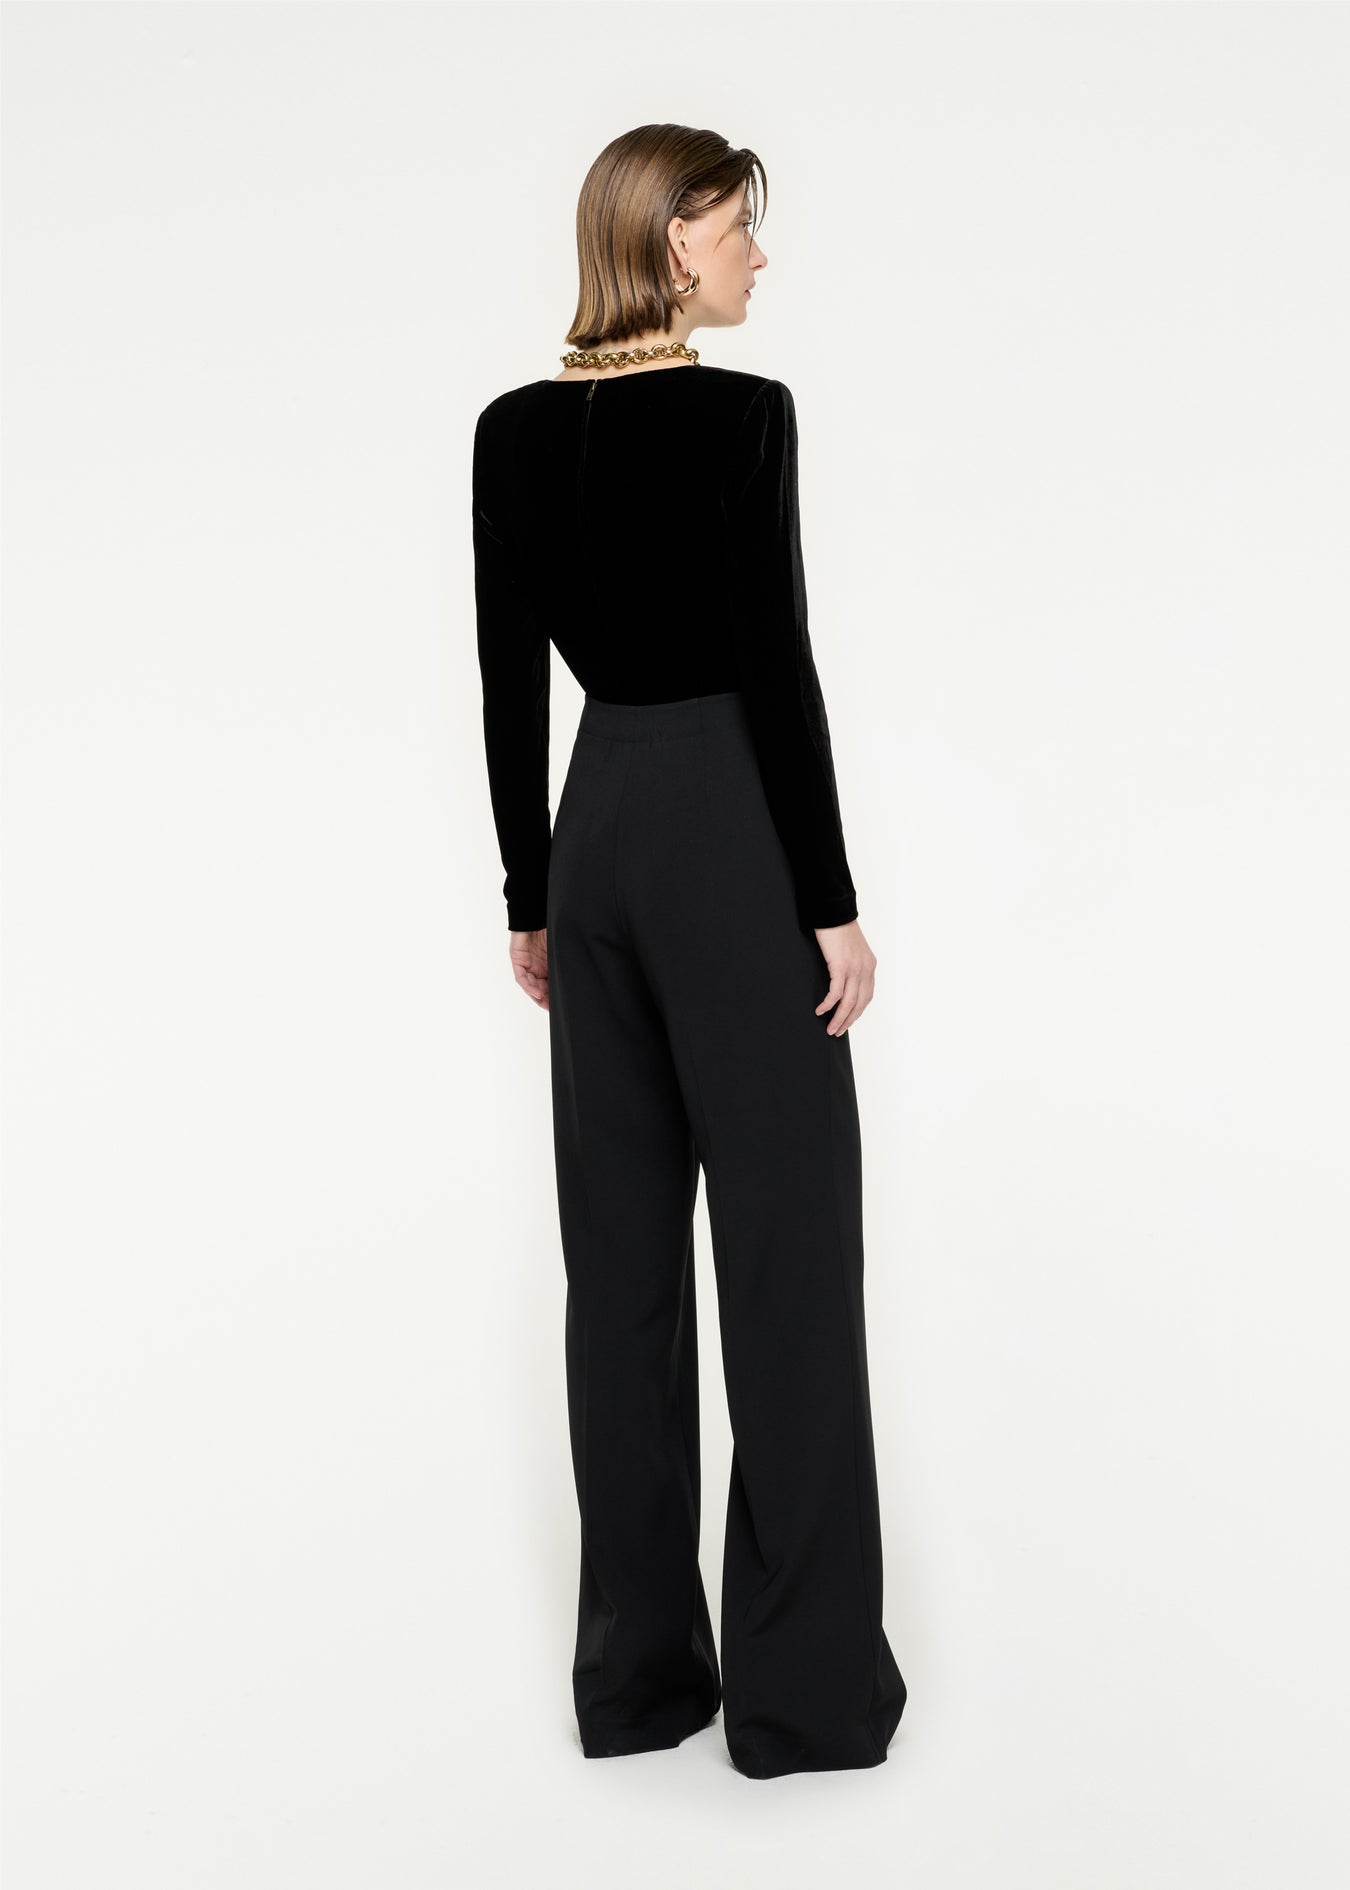 The back of a woman wearing the Long Sleeve Velvet Top in Black